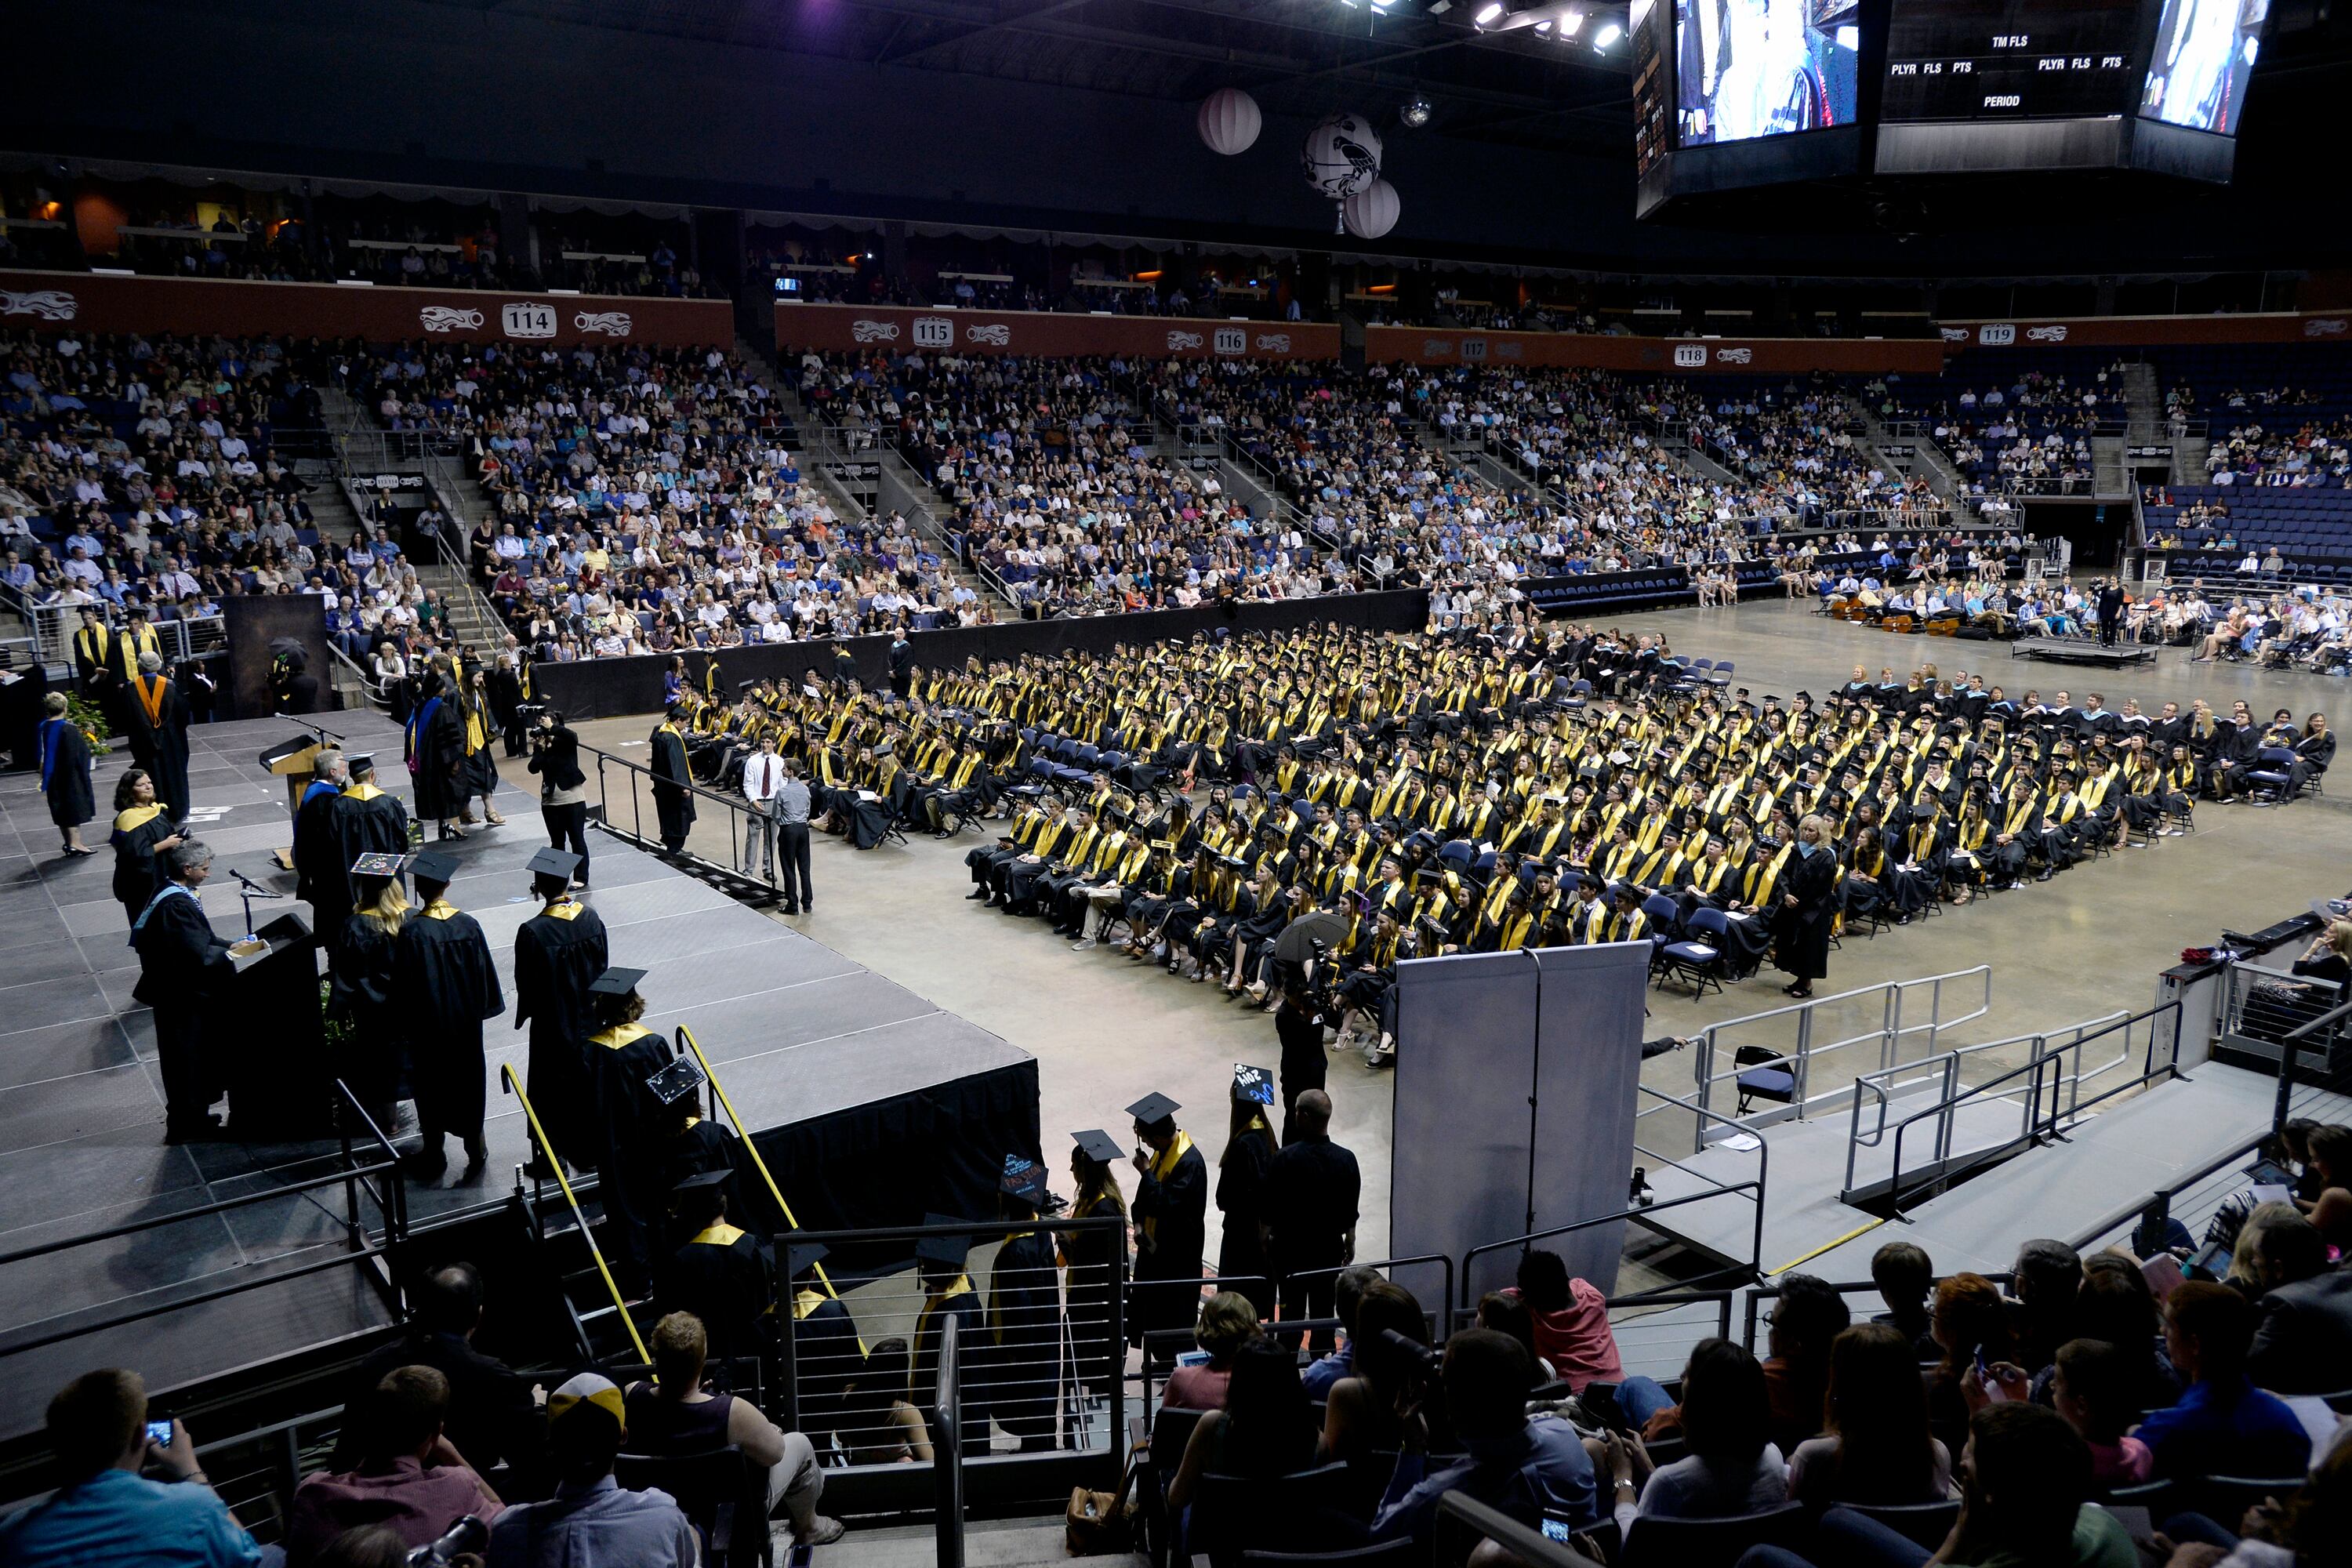 A large indoor stadium is full of high school graduates sitting in rows of chairs with friends and families sitting on the side.